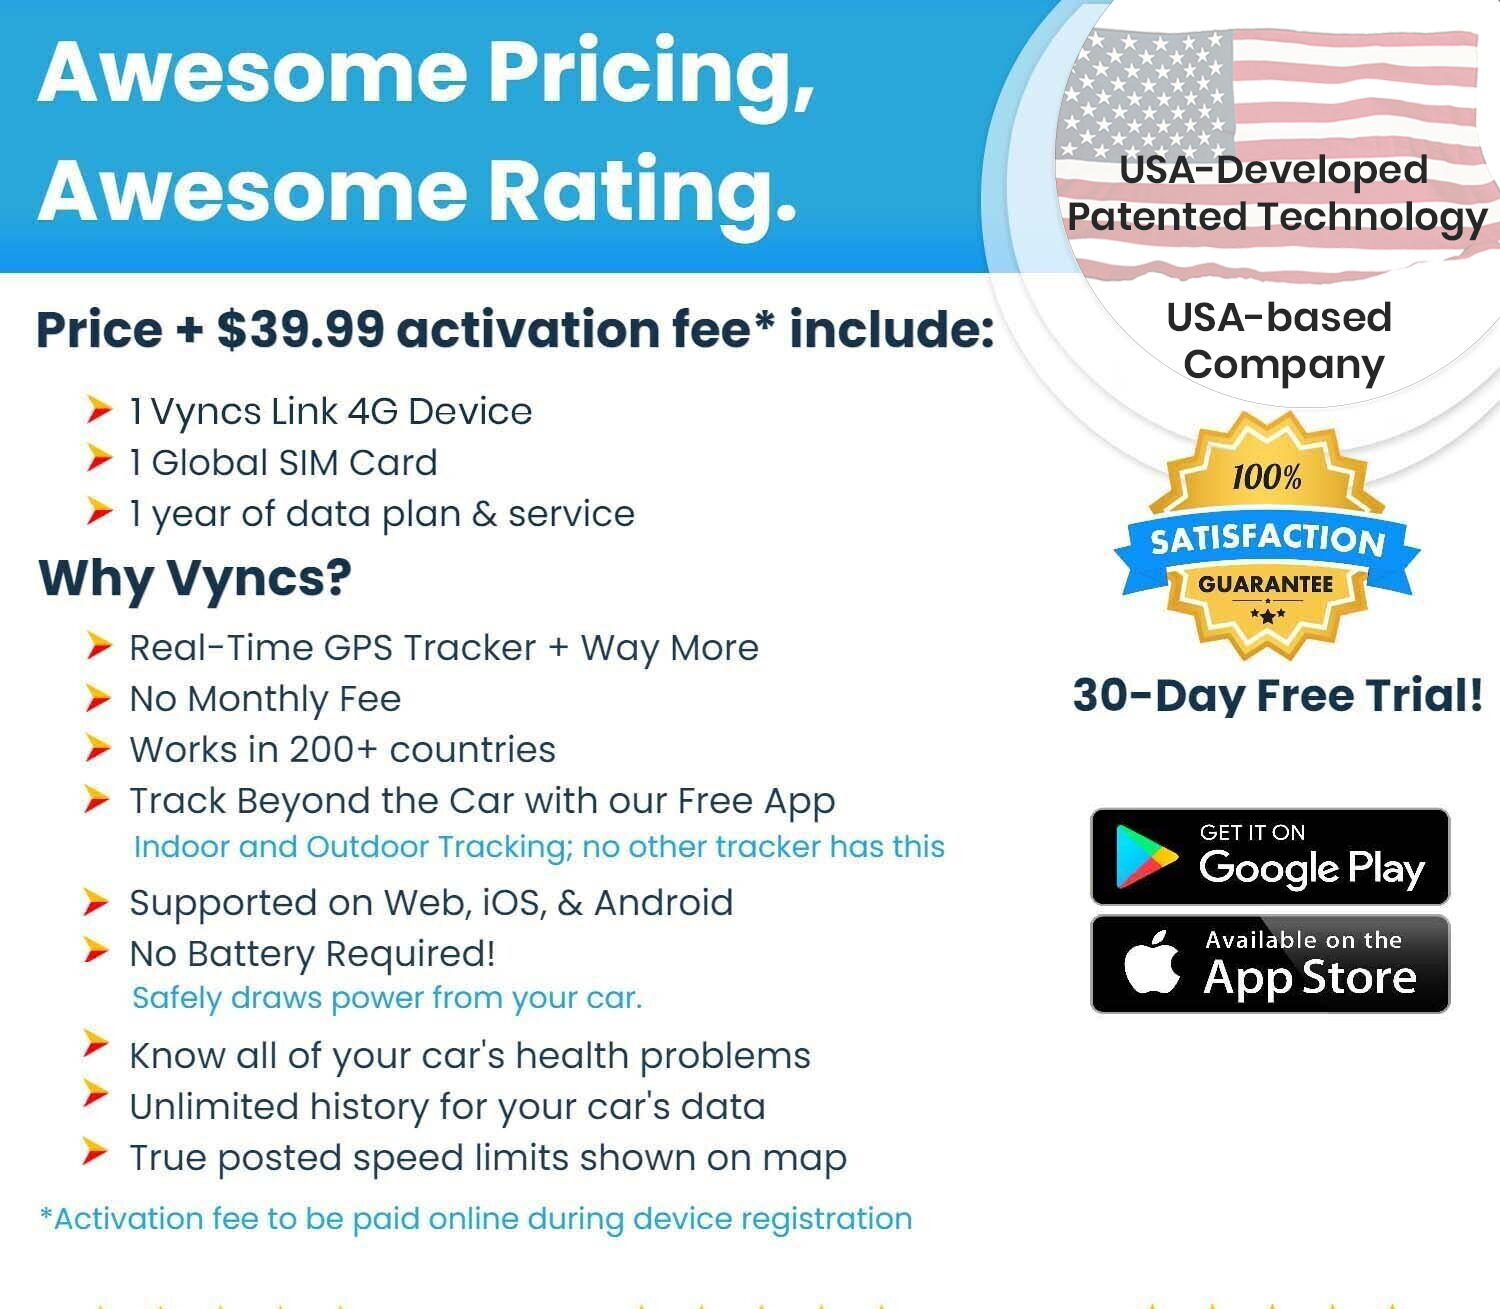 Vyncs - GPS Tracker for Vehicles 4G, No Monthly Fee, Vehicle Location, Trip History, Driving Alerts, GeoFence, Fuel Economy, OBD Fault Codes, USA-Developed, Family or Fleets, Activation Fee Required - image 3 of 7